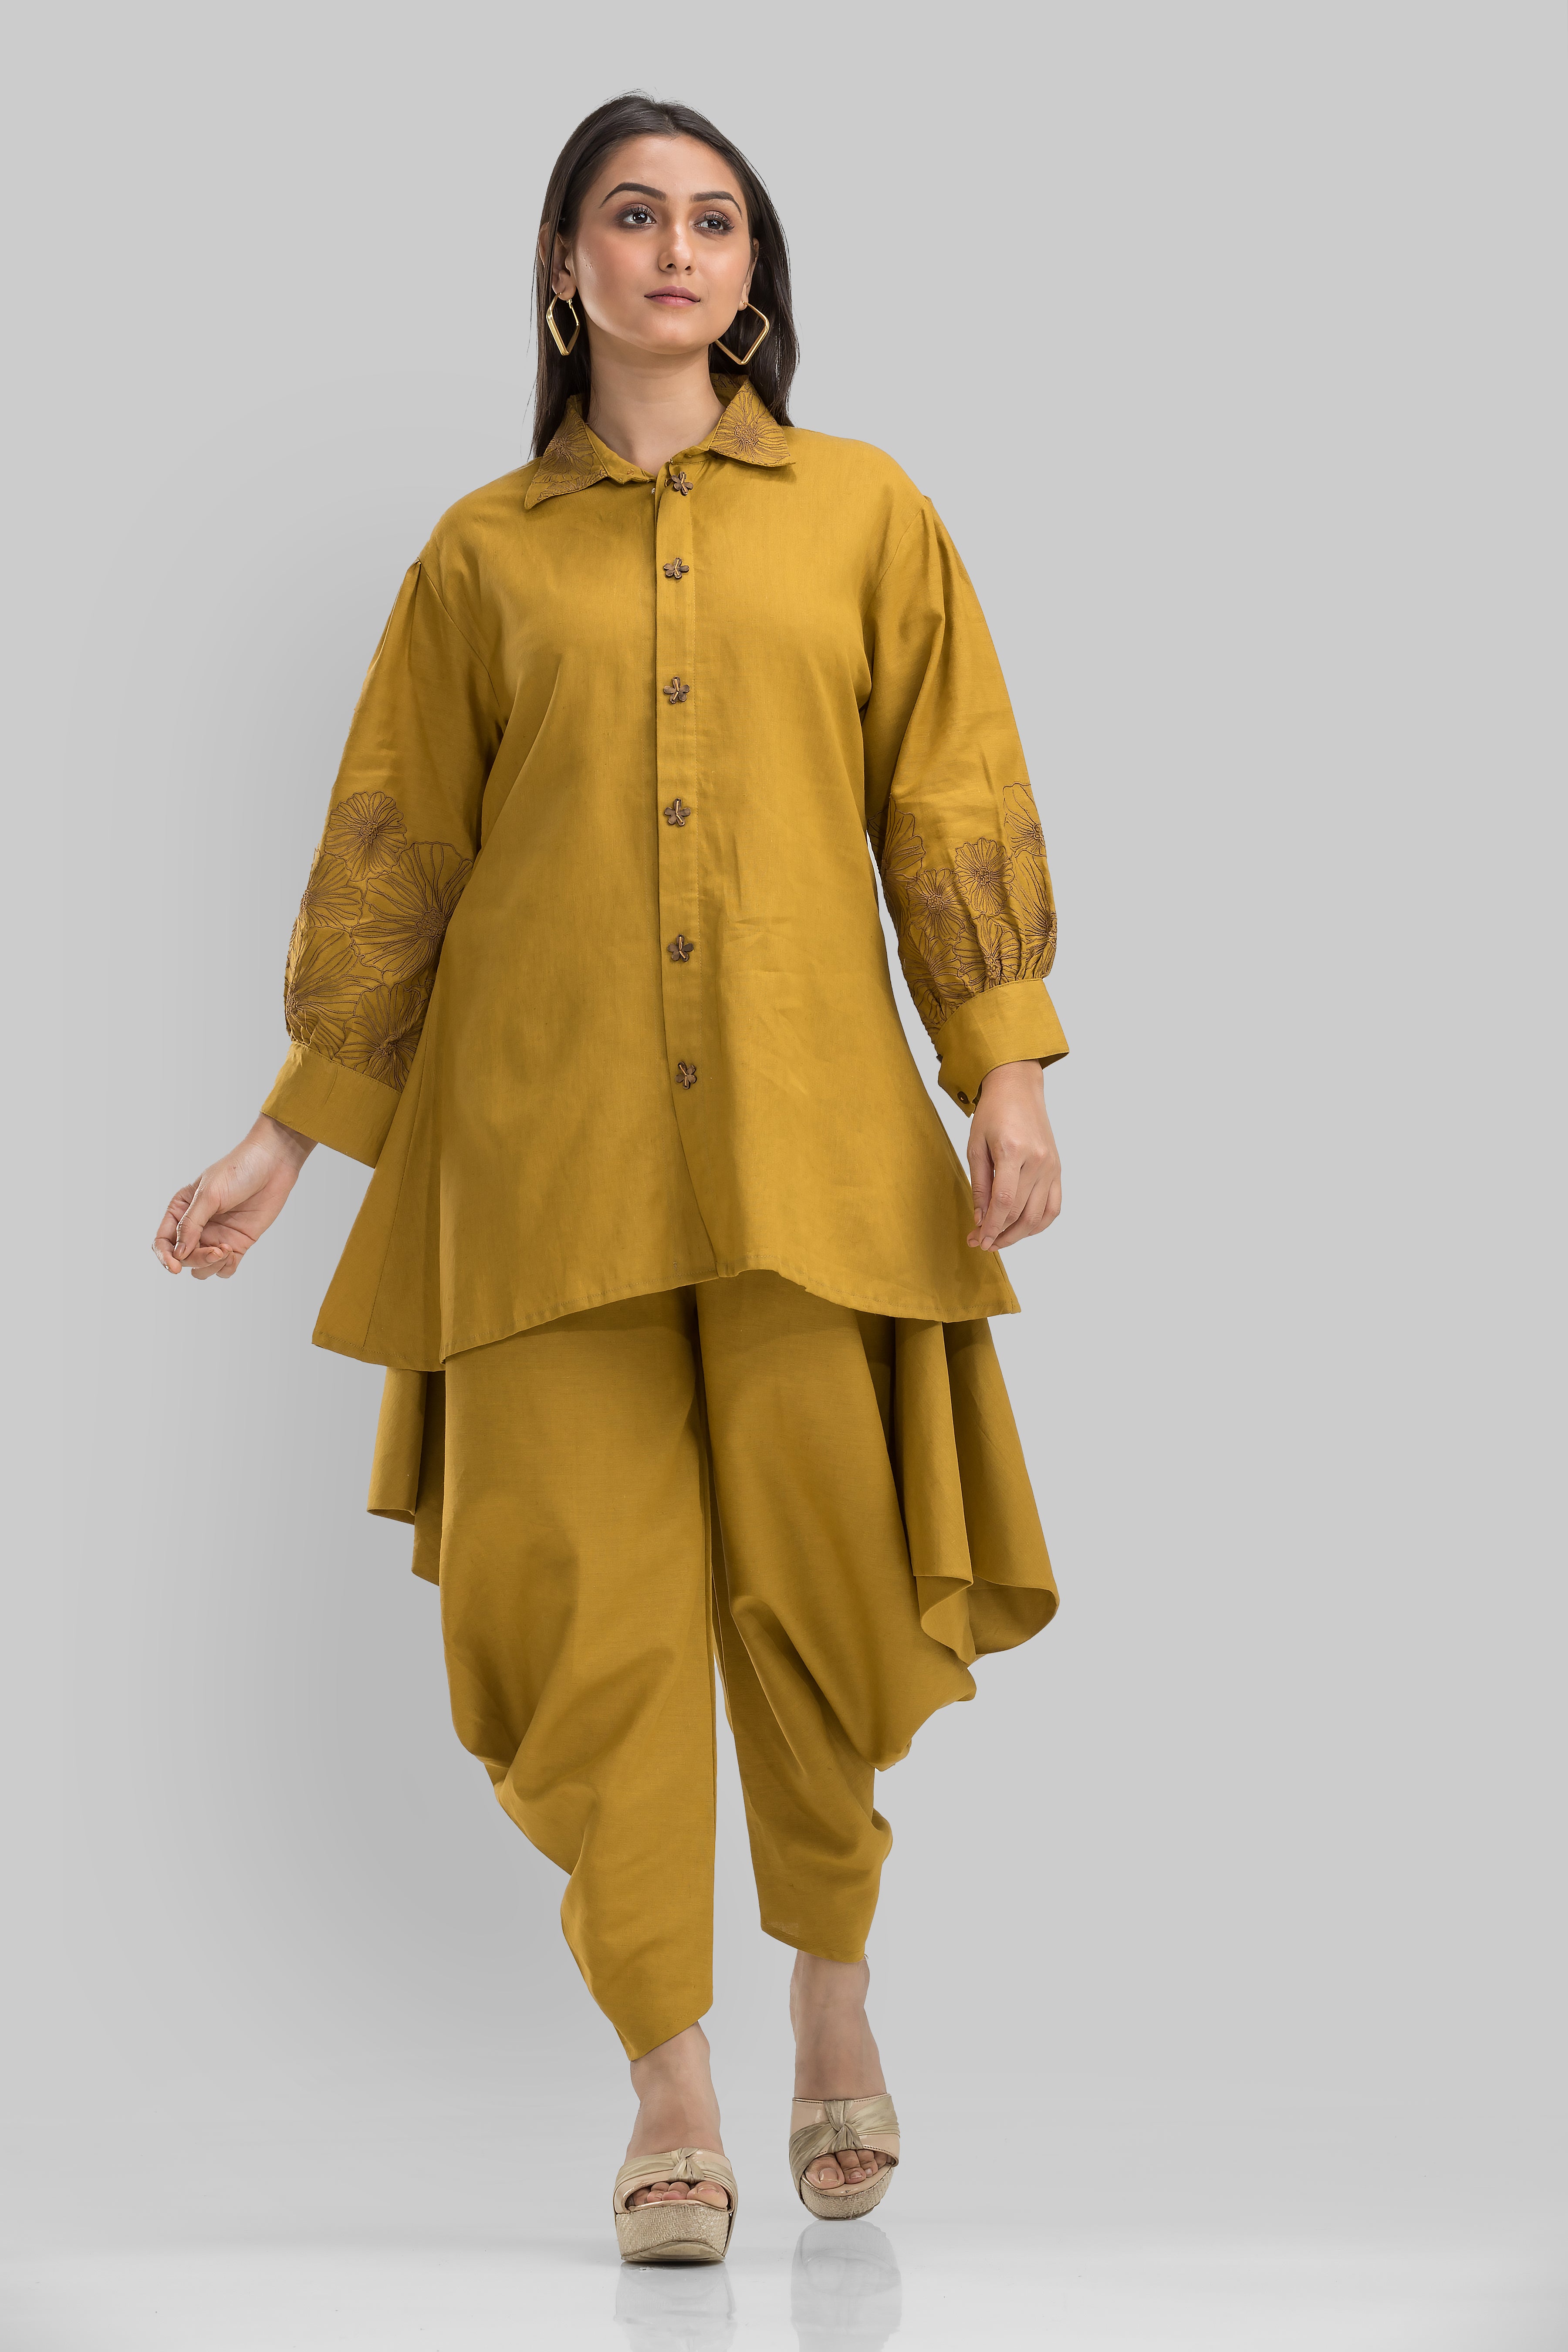 Ochre Yellow Embroidered Co-ord Set